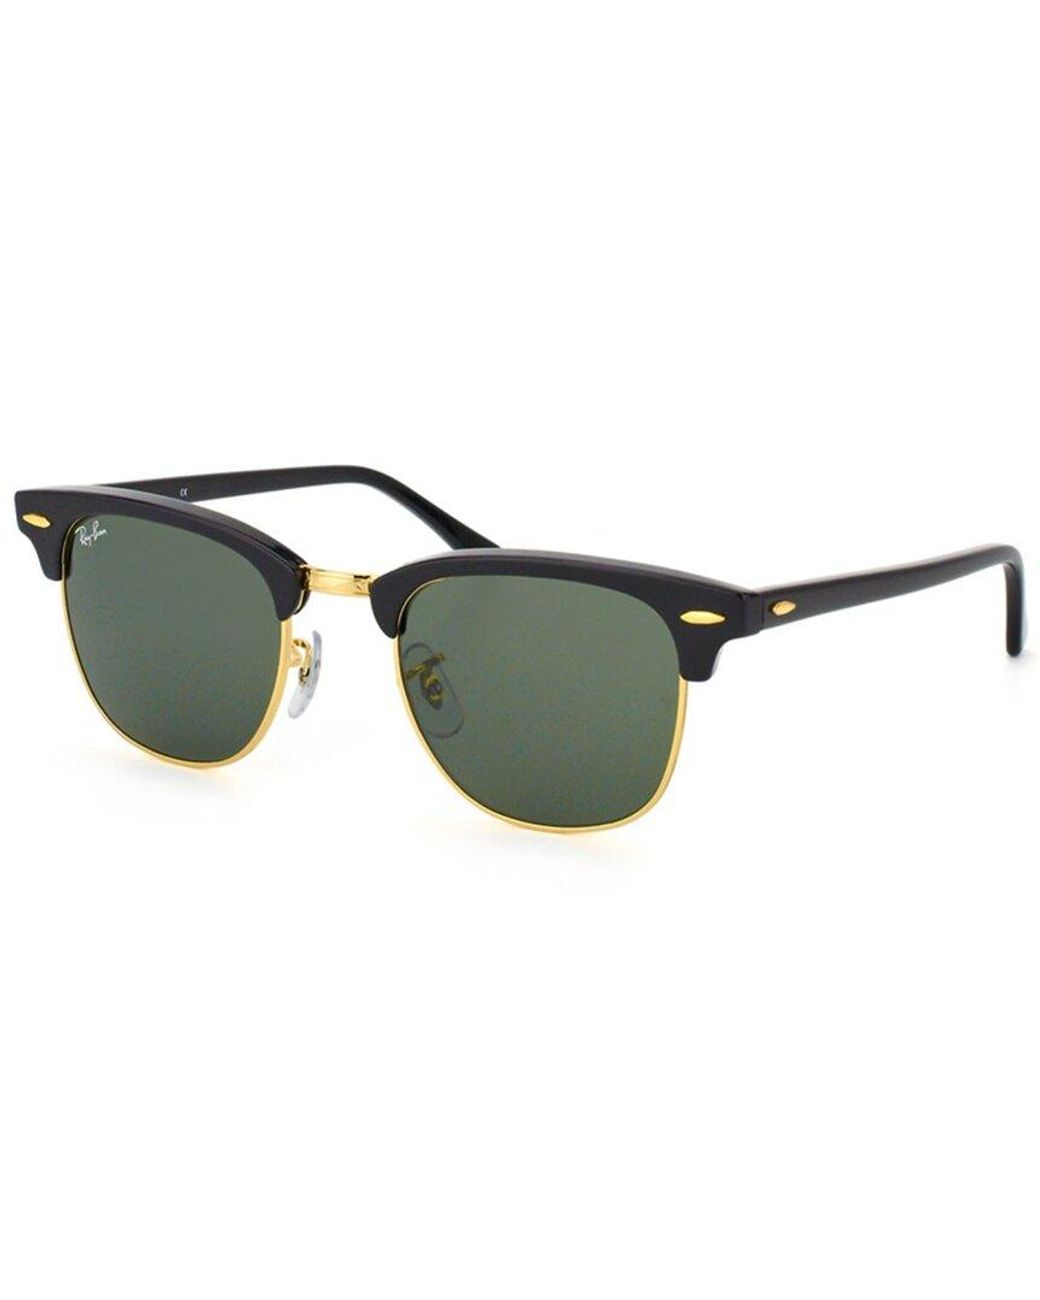 Ray-Ban Rb3016 W0365 Clubmaster 51mm Sunglasses in Green | Lyst Australia